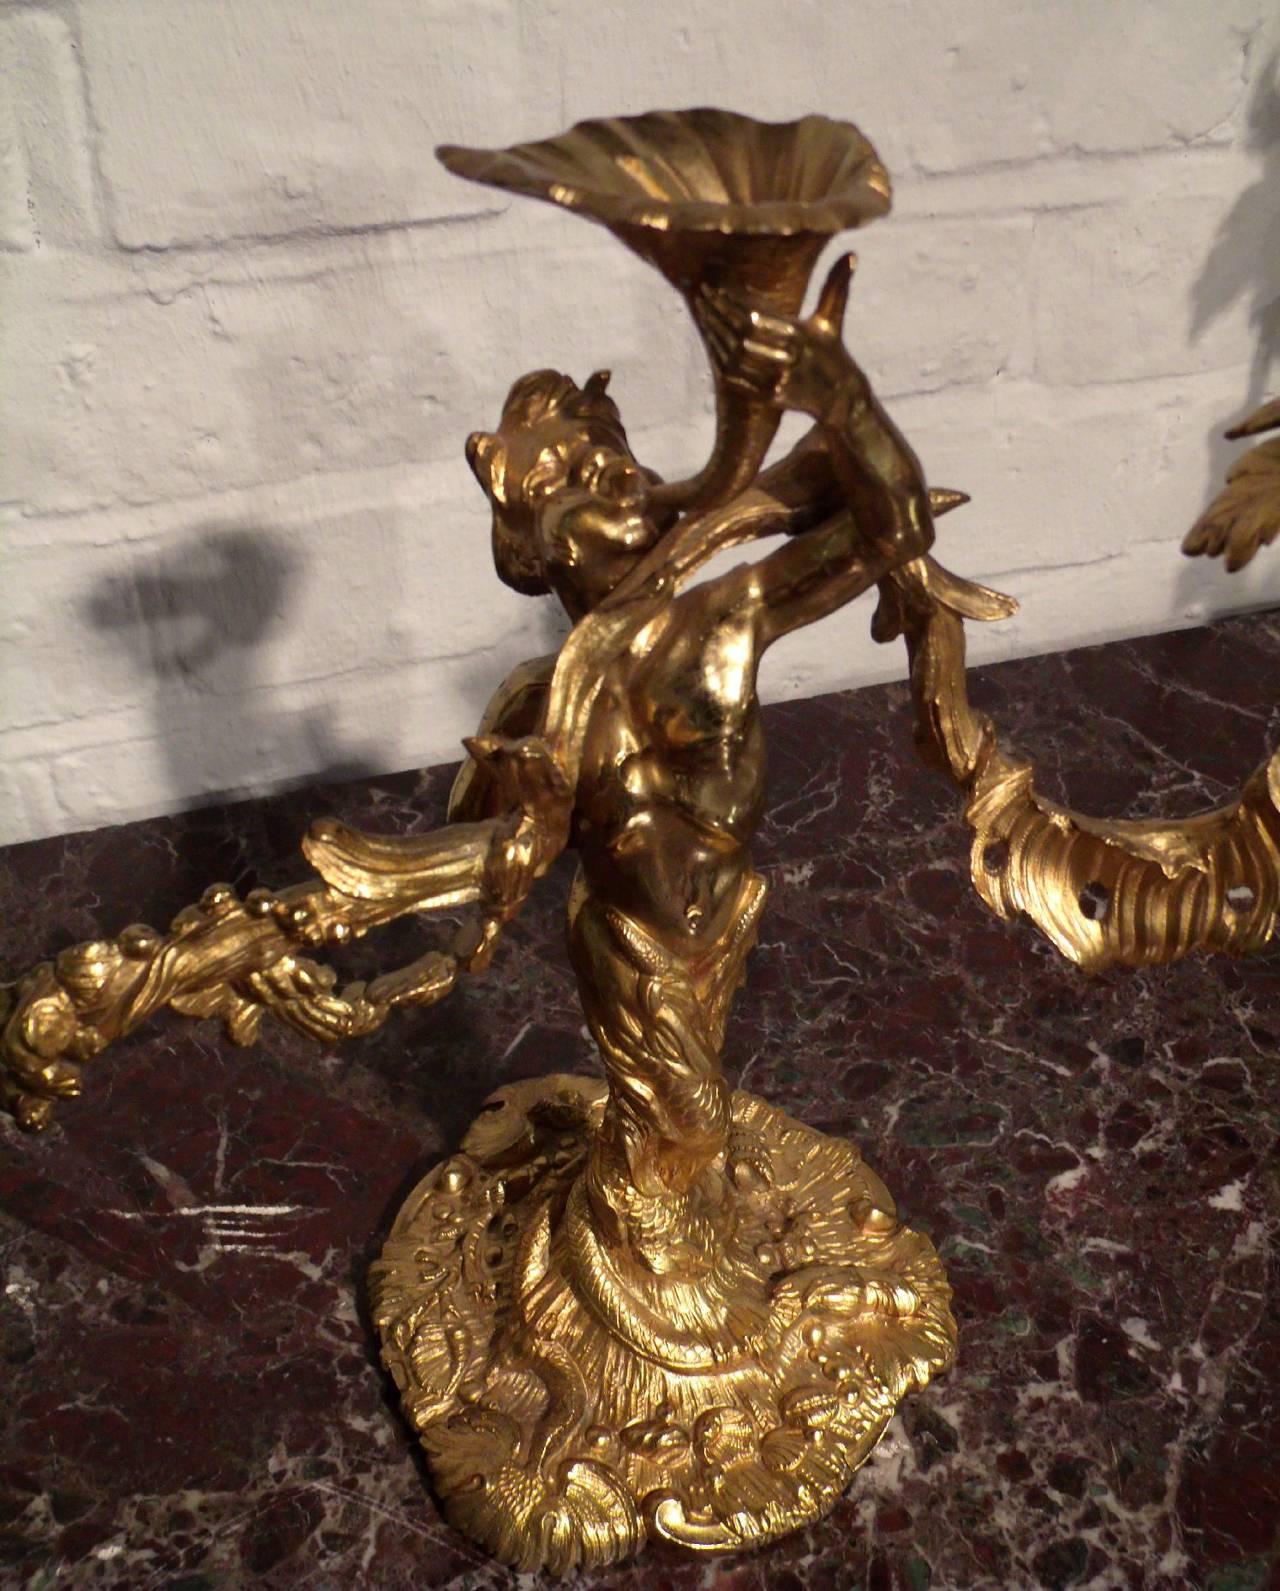 Pair of 19th C. French Ormolu Mermen Table Candelabras In Excellent Condition In London, west Sussex